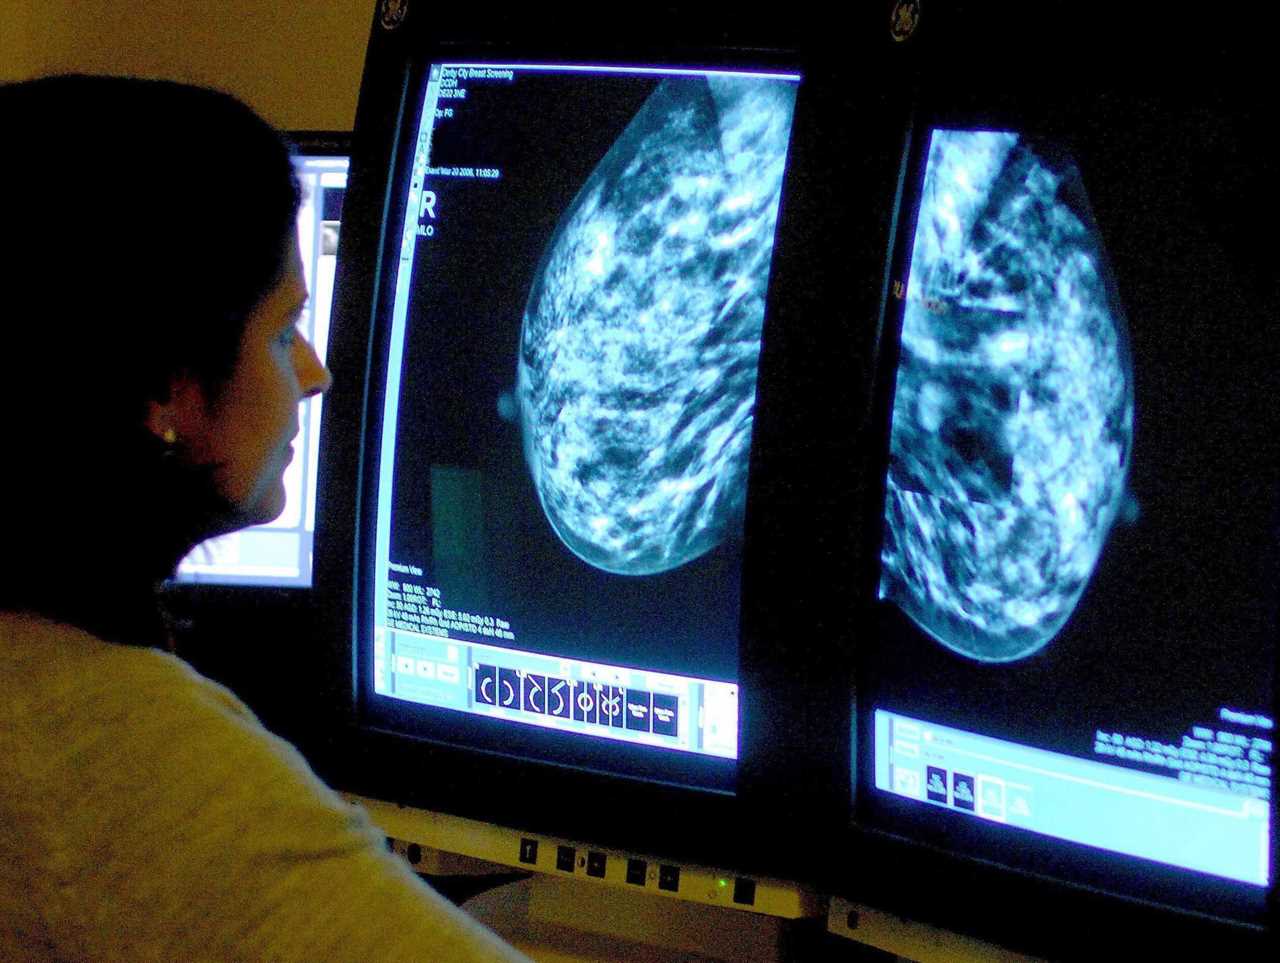 Alarming Number of Women Skipping Breast Cancer Screenings, Charity Warns